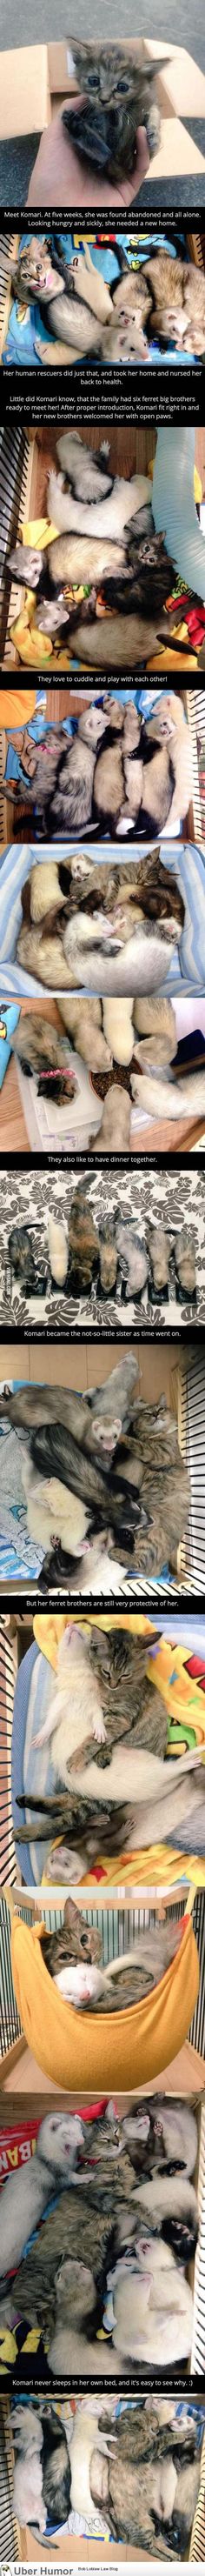 Hilarious Pictures Of Wet Cats Cat Bath Kitty Couture 1